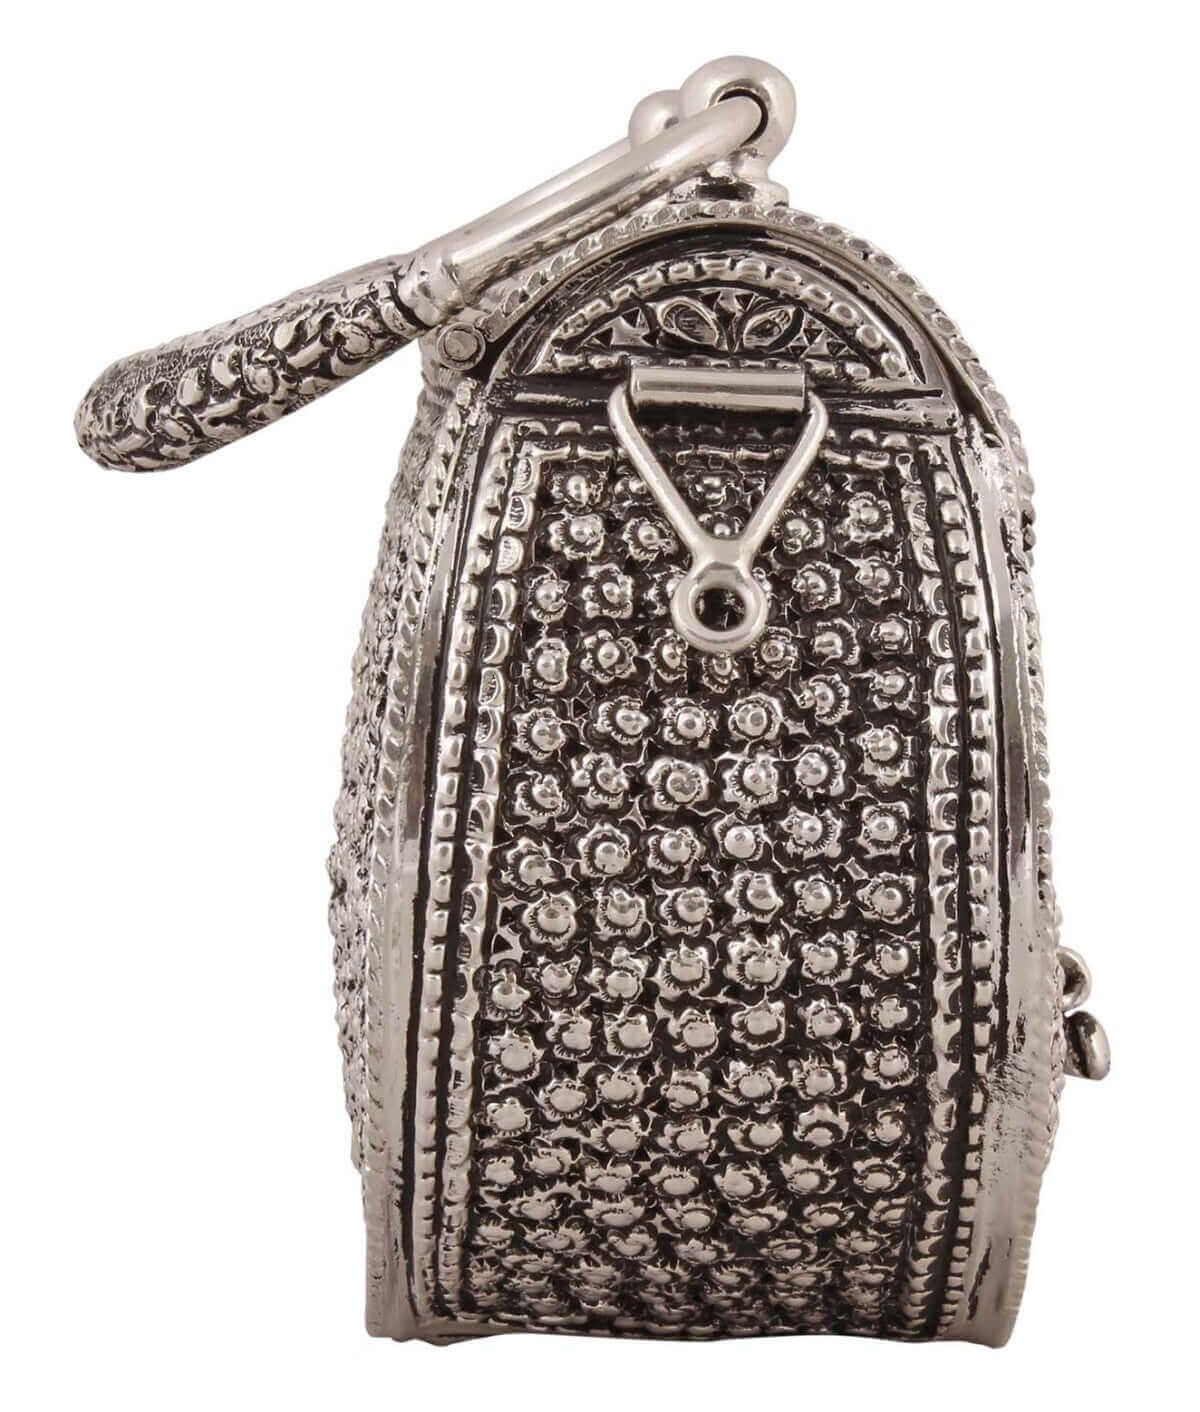 Kesardeep Impex Female Silver Purse In 925 Sterling Silver Pure Designer  Handclutch at Rs 45000/piece in Jaipur